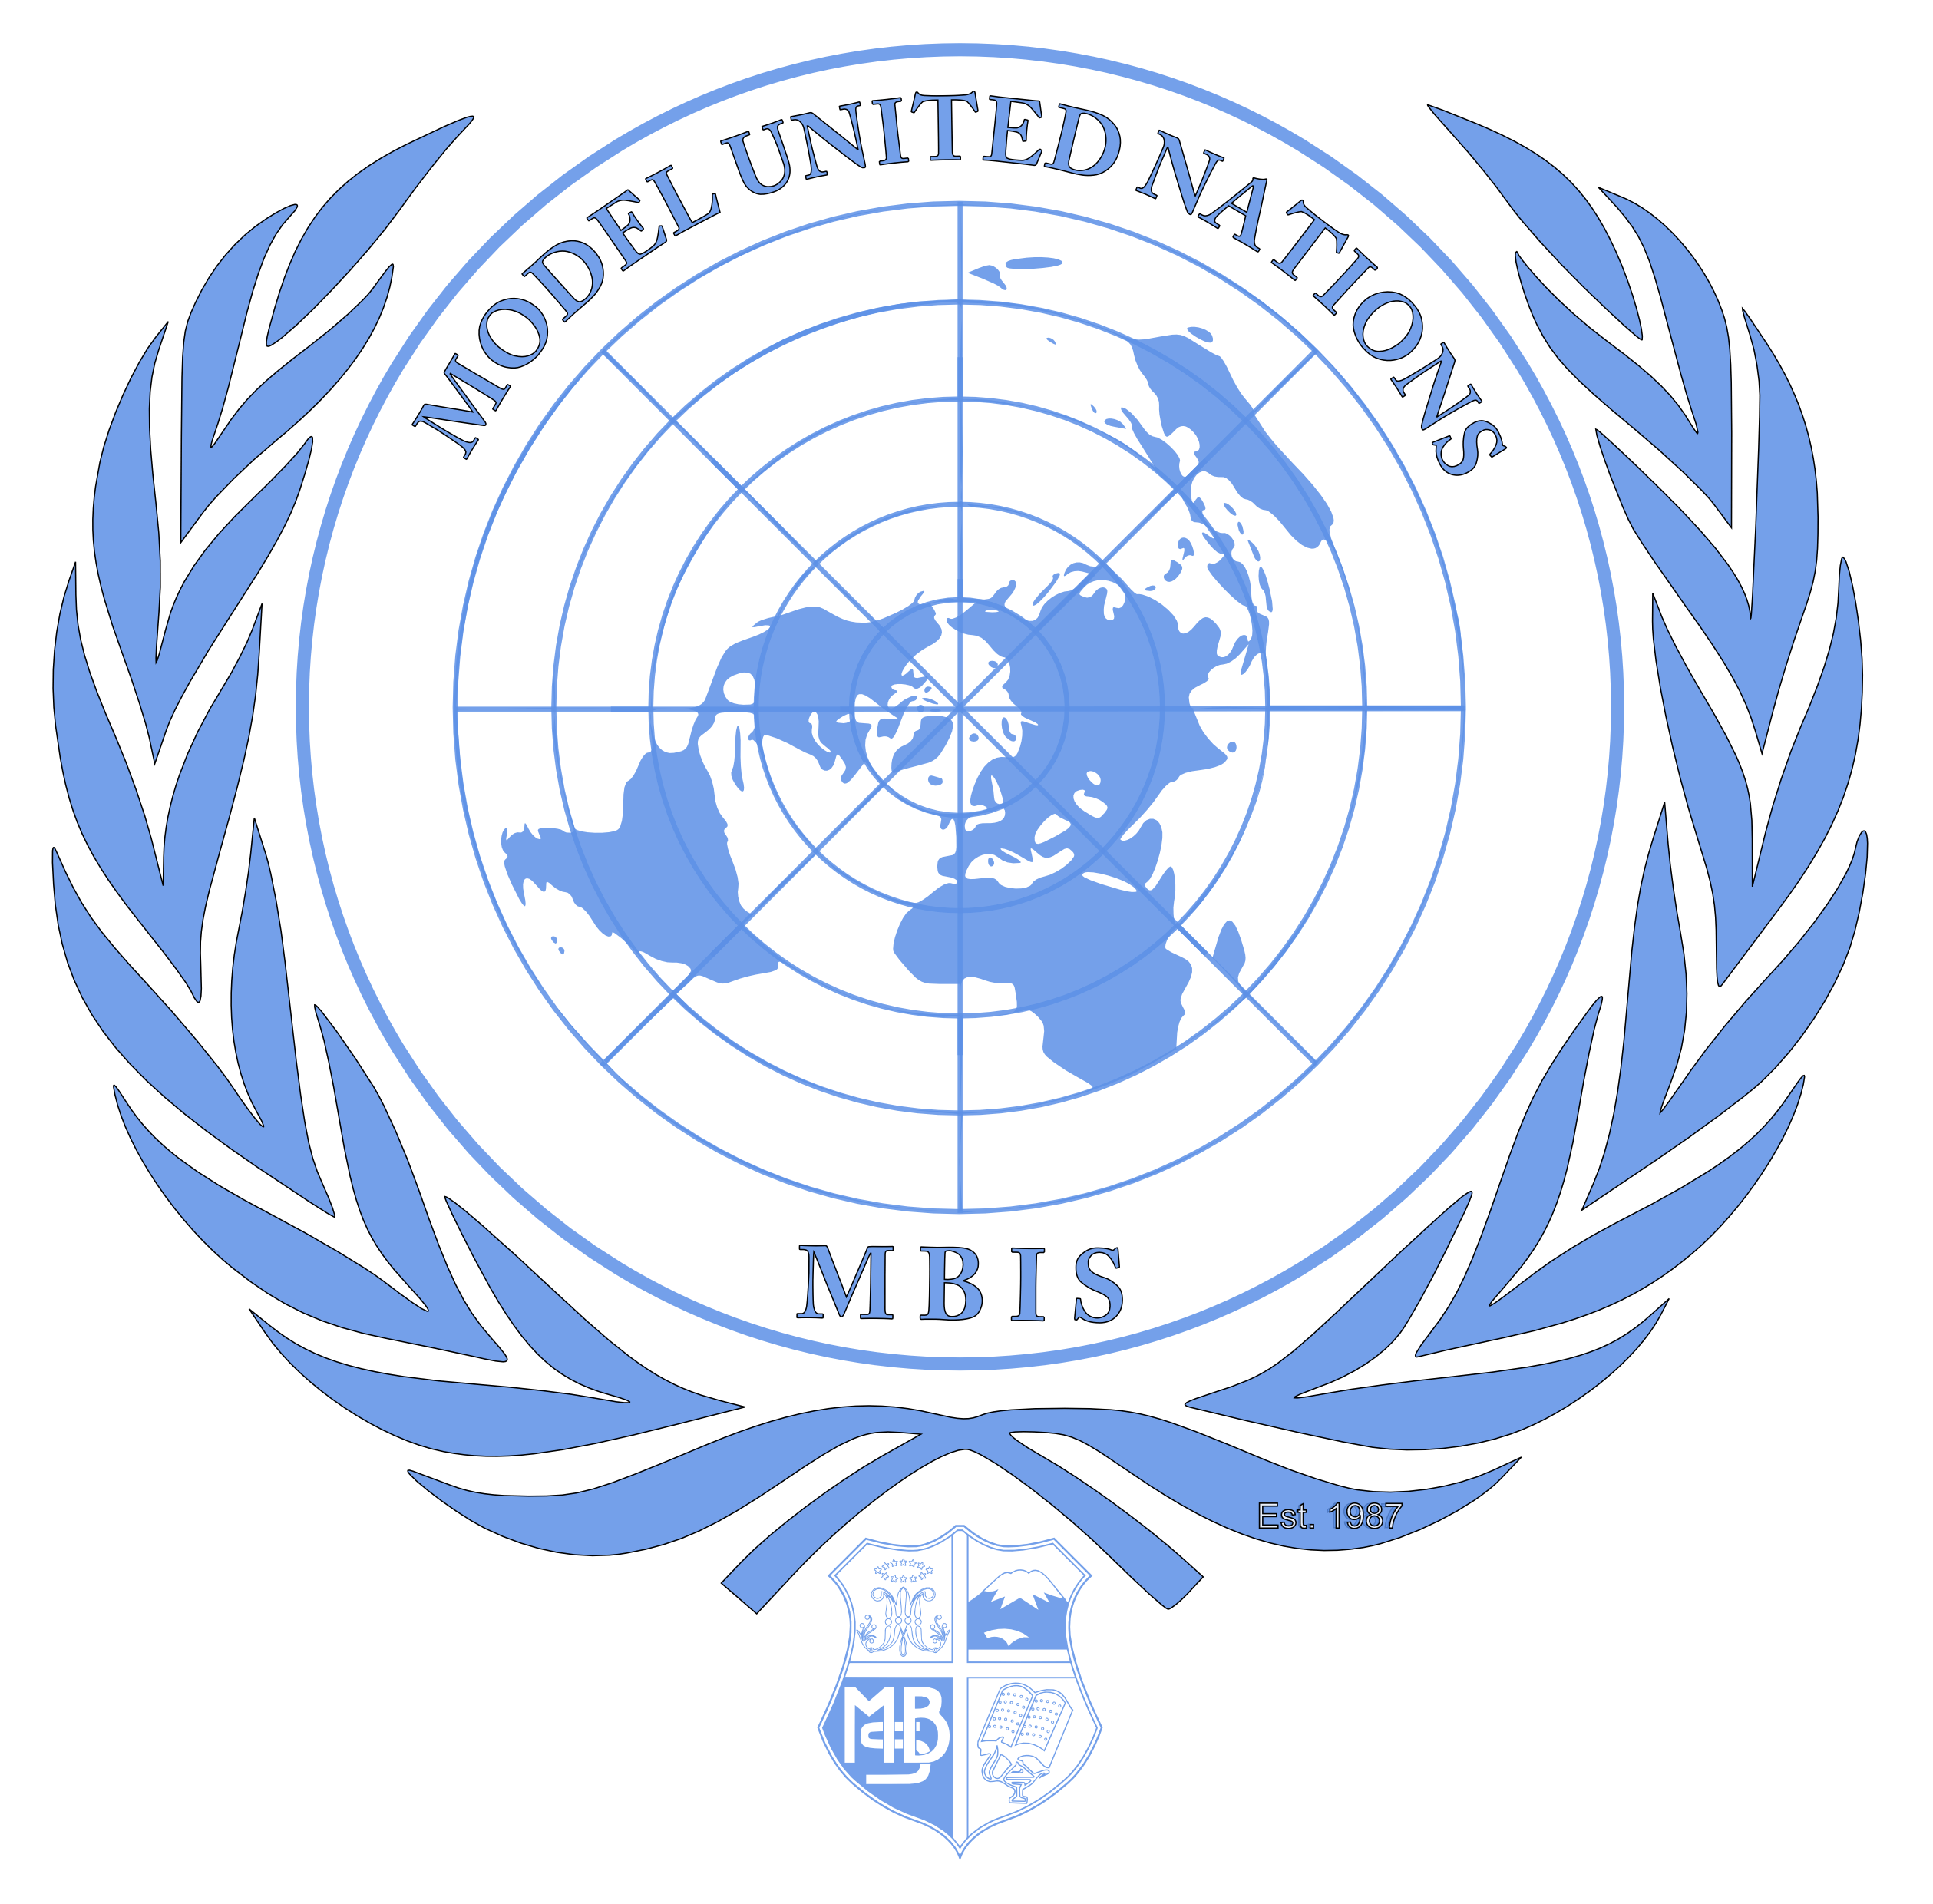 Model United Nations Logo - MSUB to host Model United Nations Conference | MSU Billings